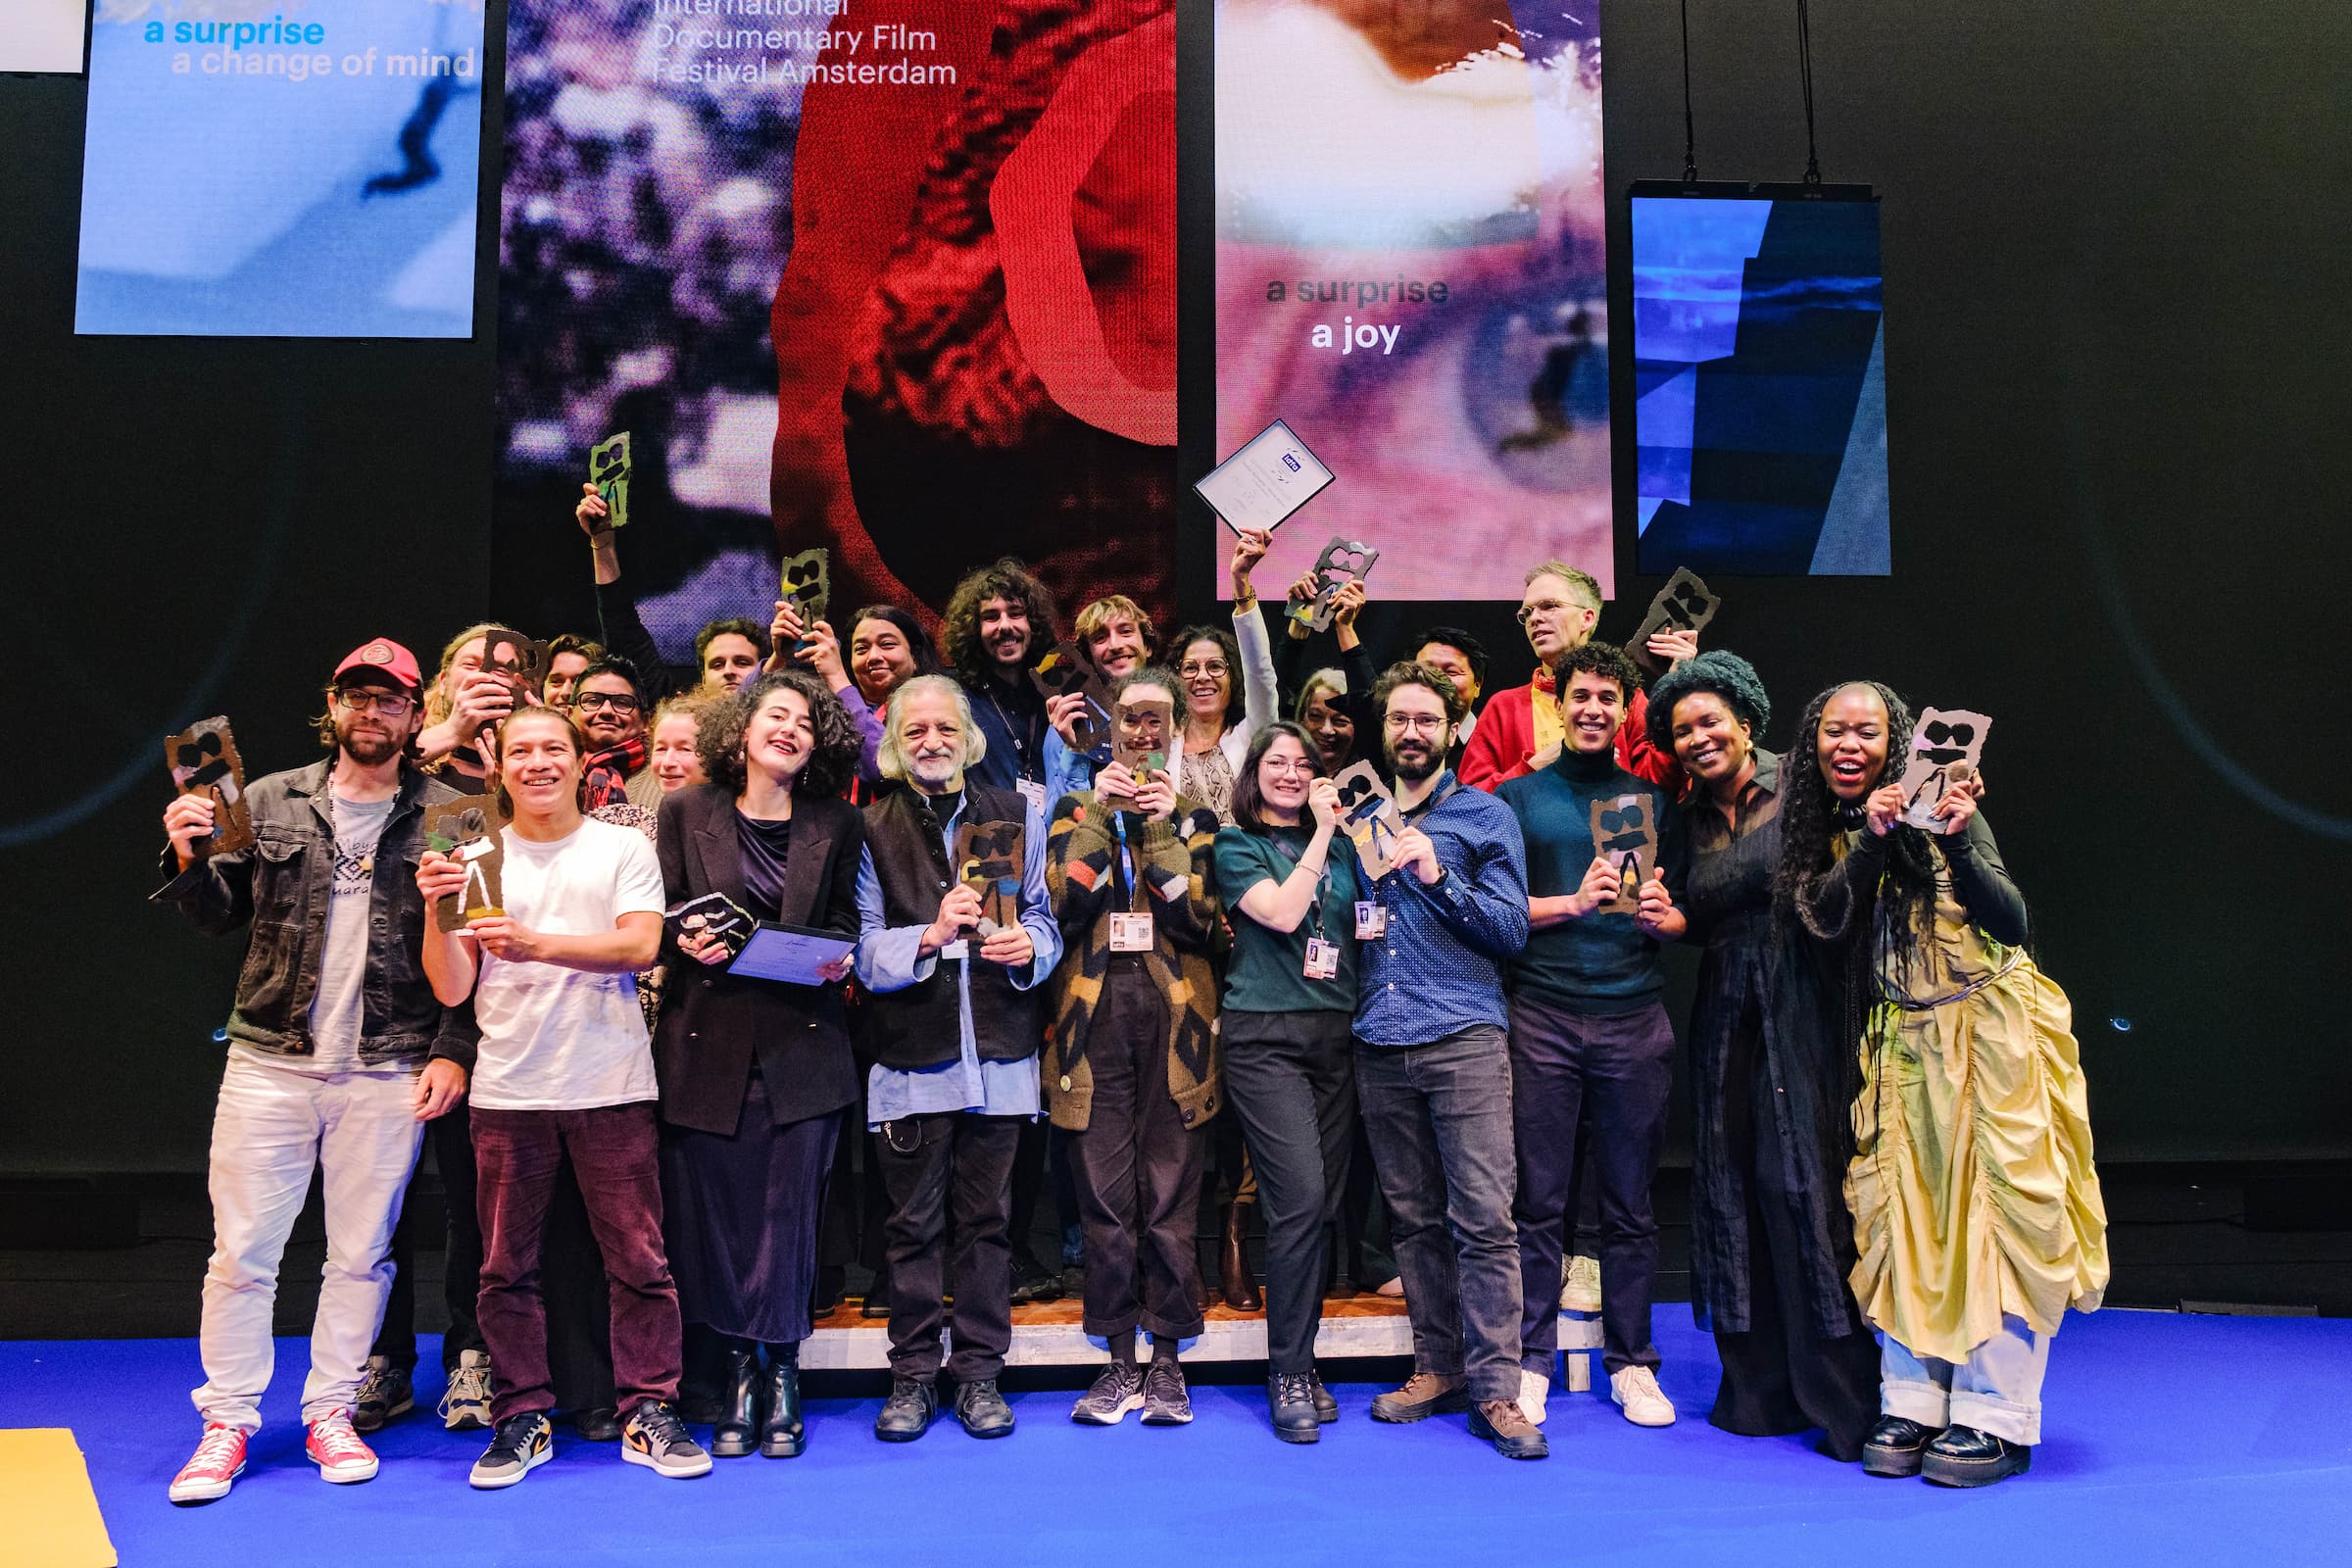 1489 wins Best Film in the International Competition and Canuto's Transformation wins Best Film in the Envision Competition